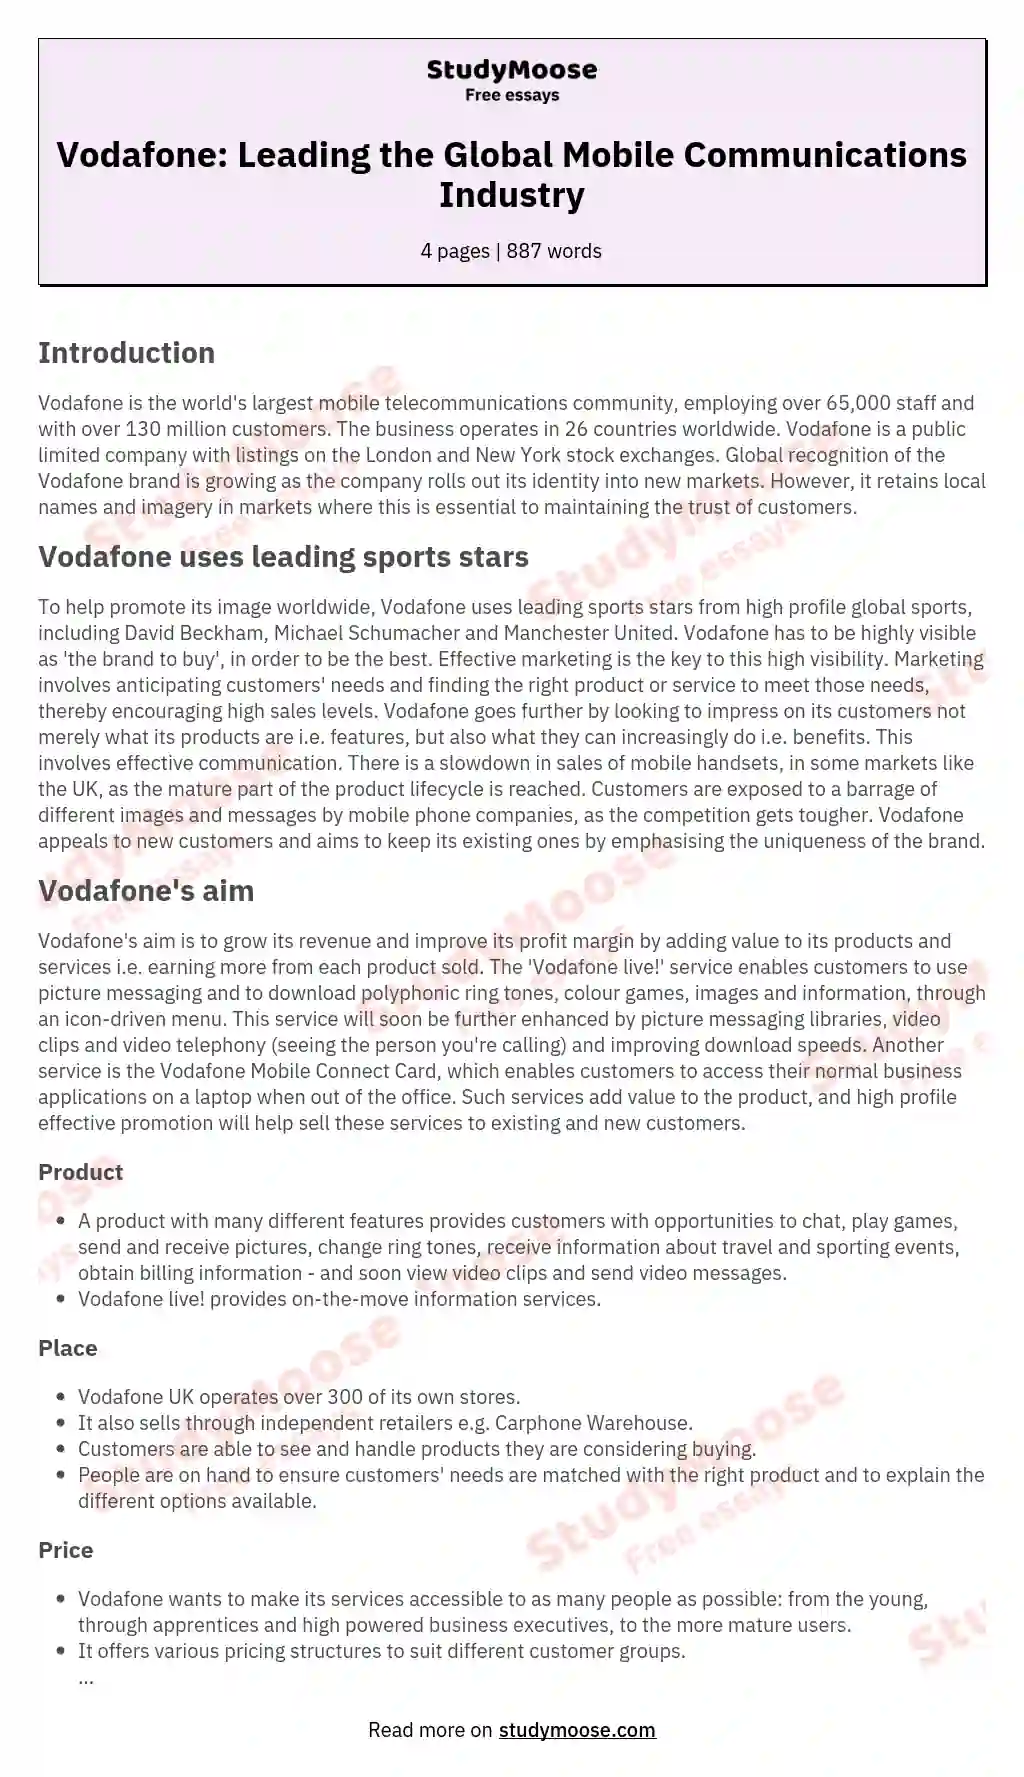 Vodafone: Leading the Global Mobile Communications Industry essay